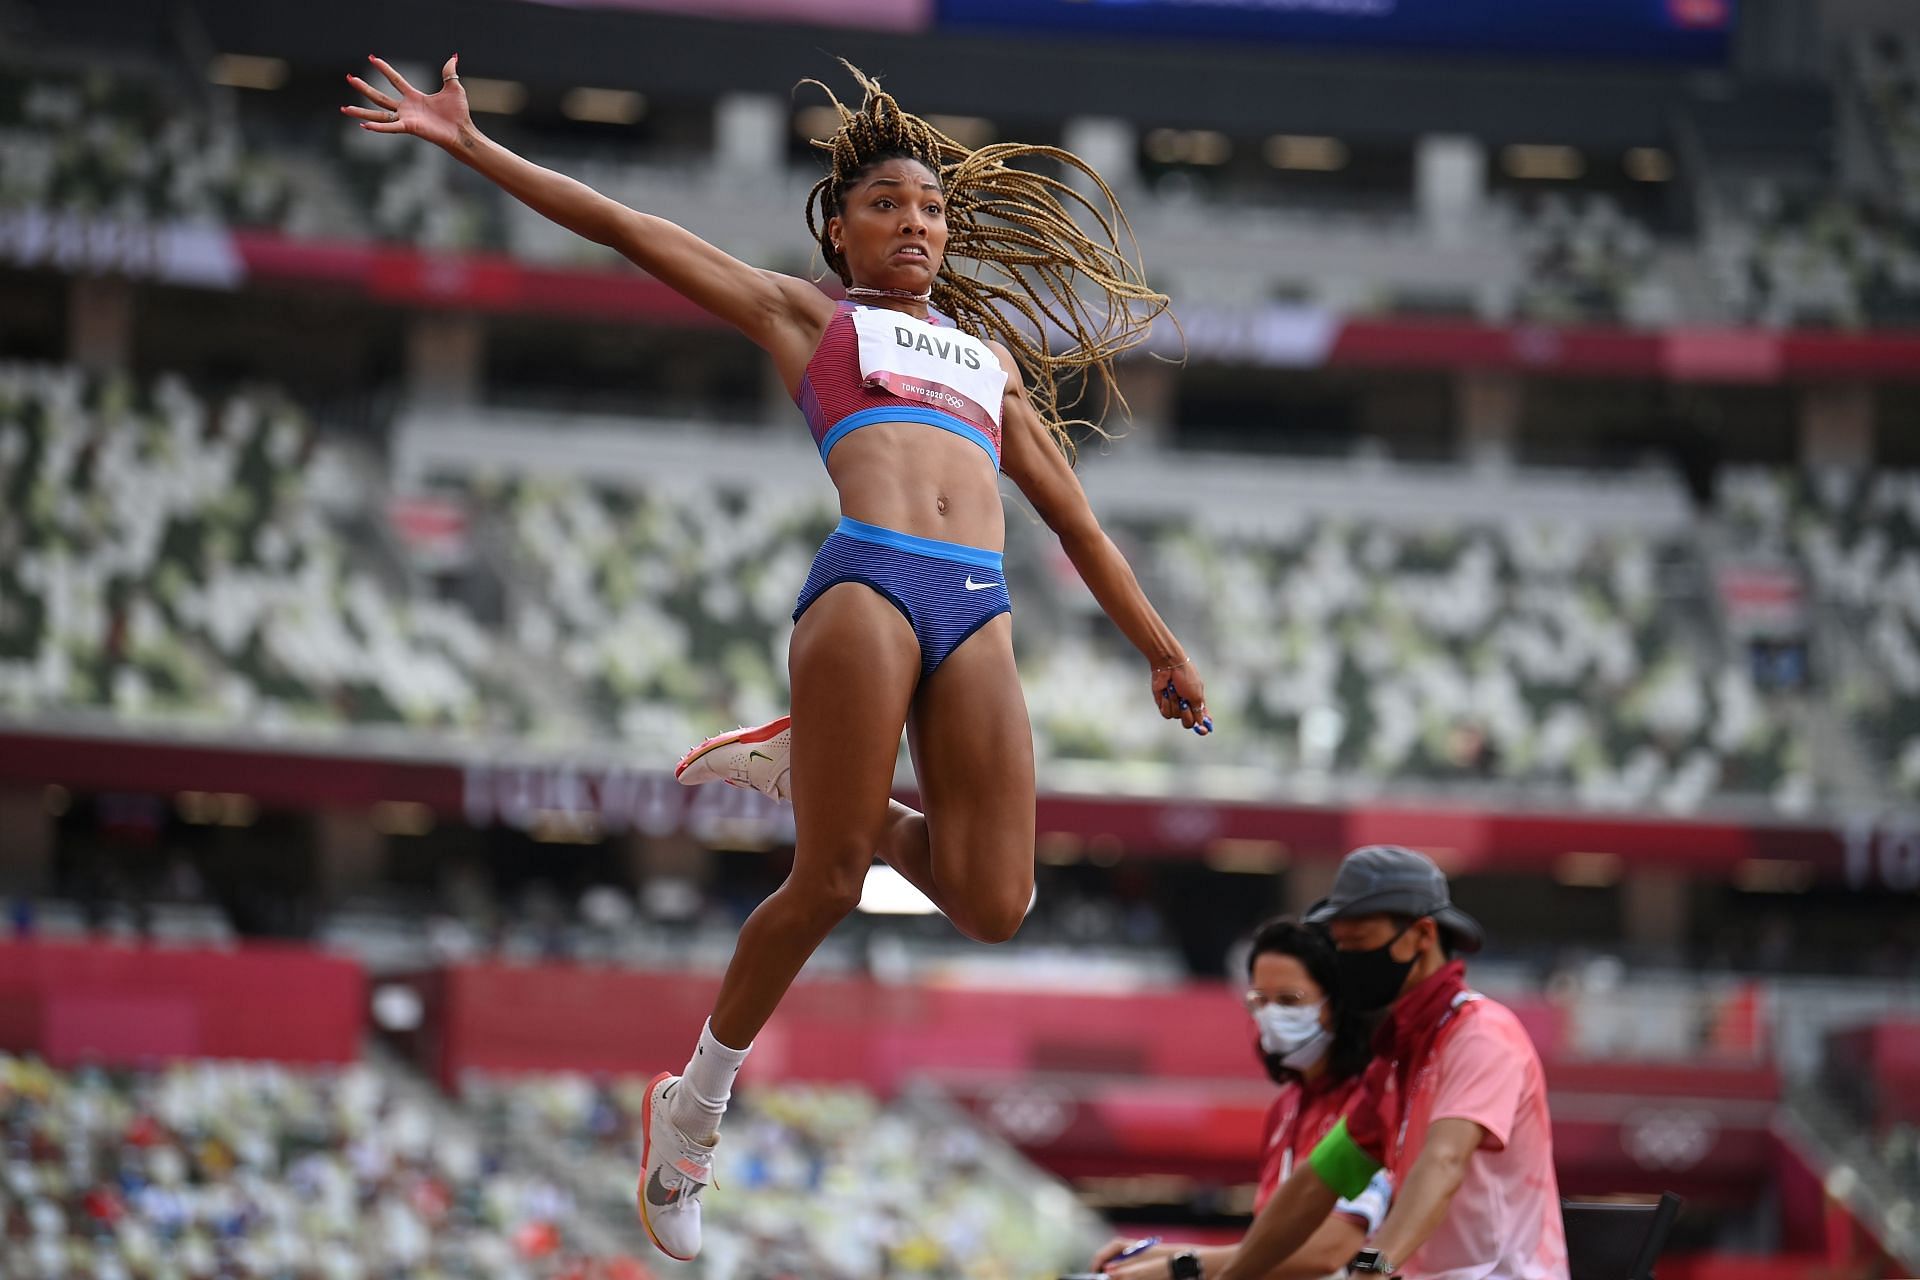 Tara Davis of Team United States competes in the Women&#039;s Long Jump Final on day eleven of the Tokyo 2020 Olympic Games at Olympic Stadium on August 03, 2021 in Tokyo, Japan. (Photo by Matthias Hangst/Getty Images)